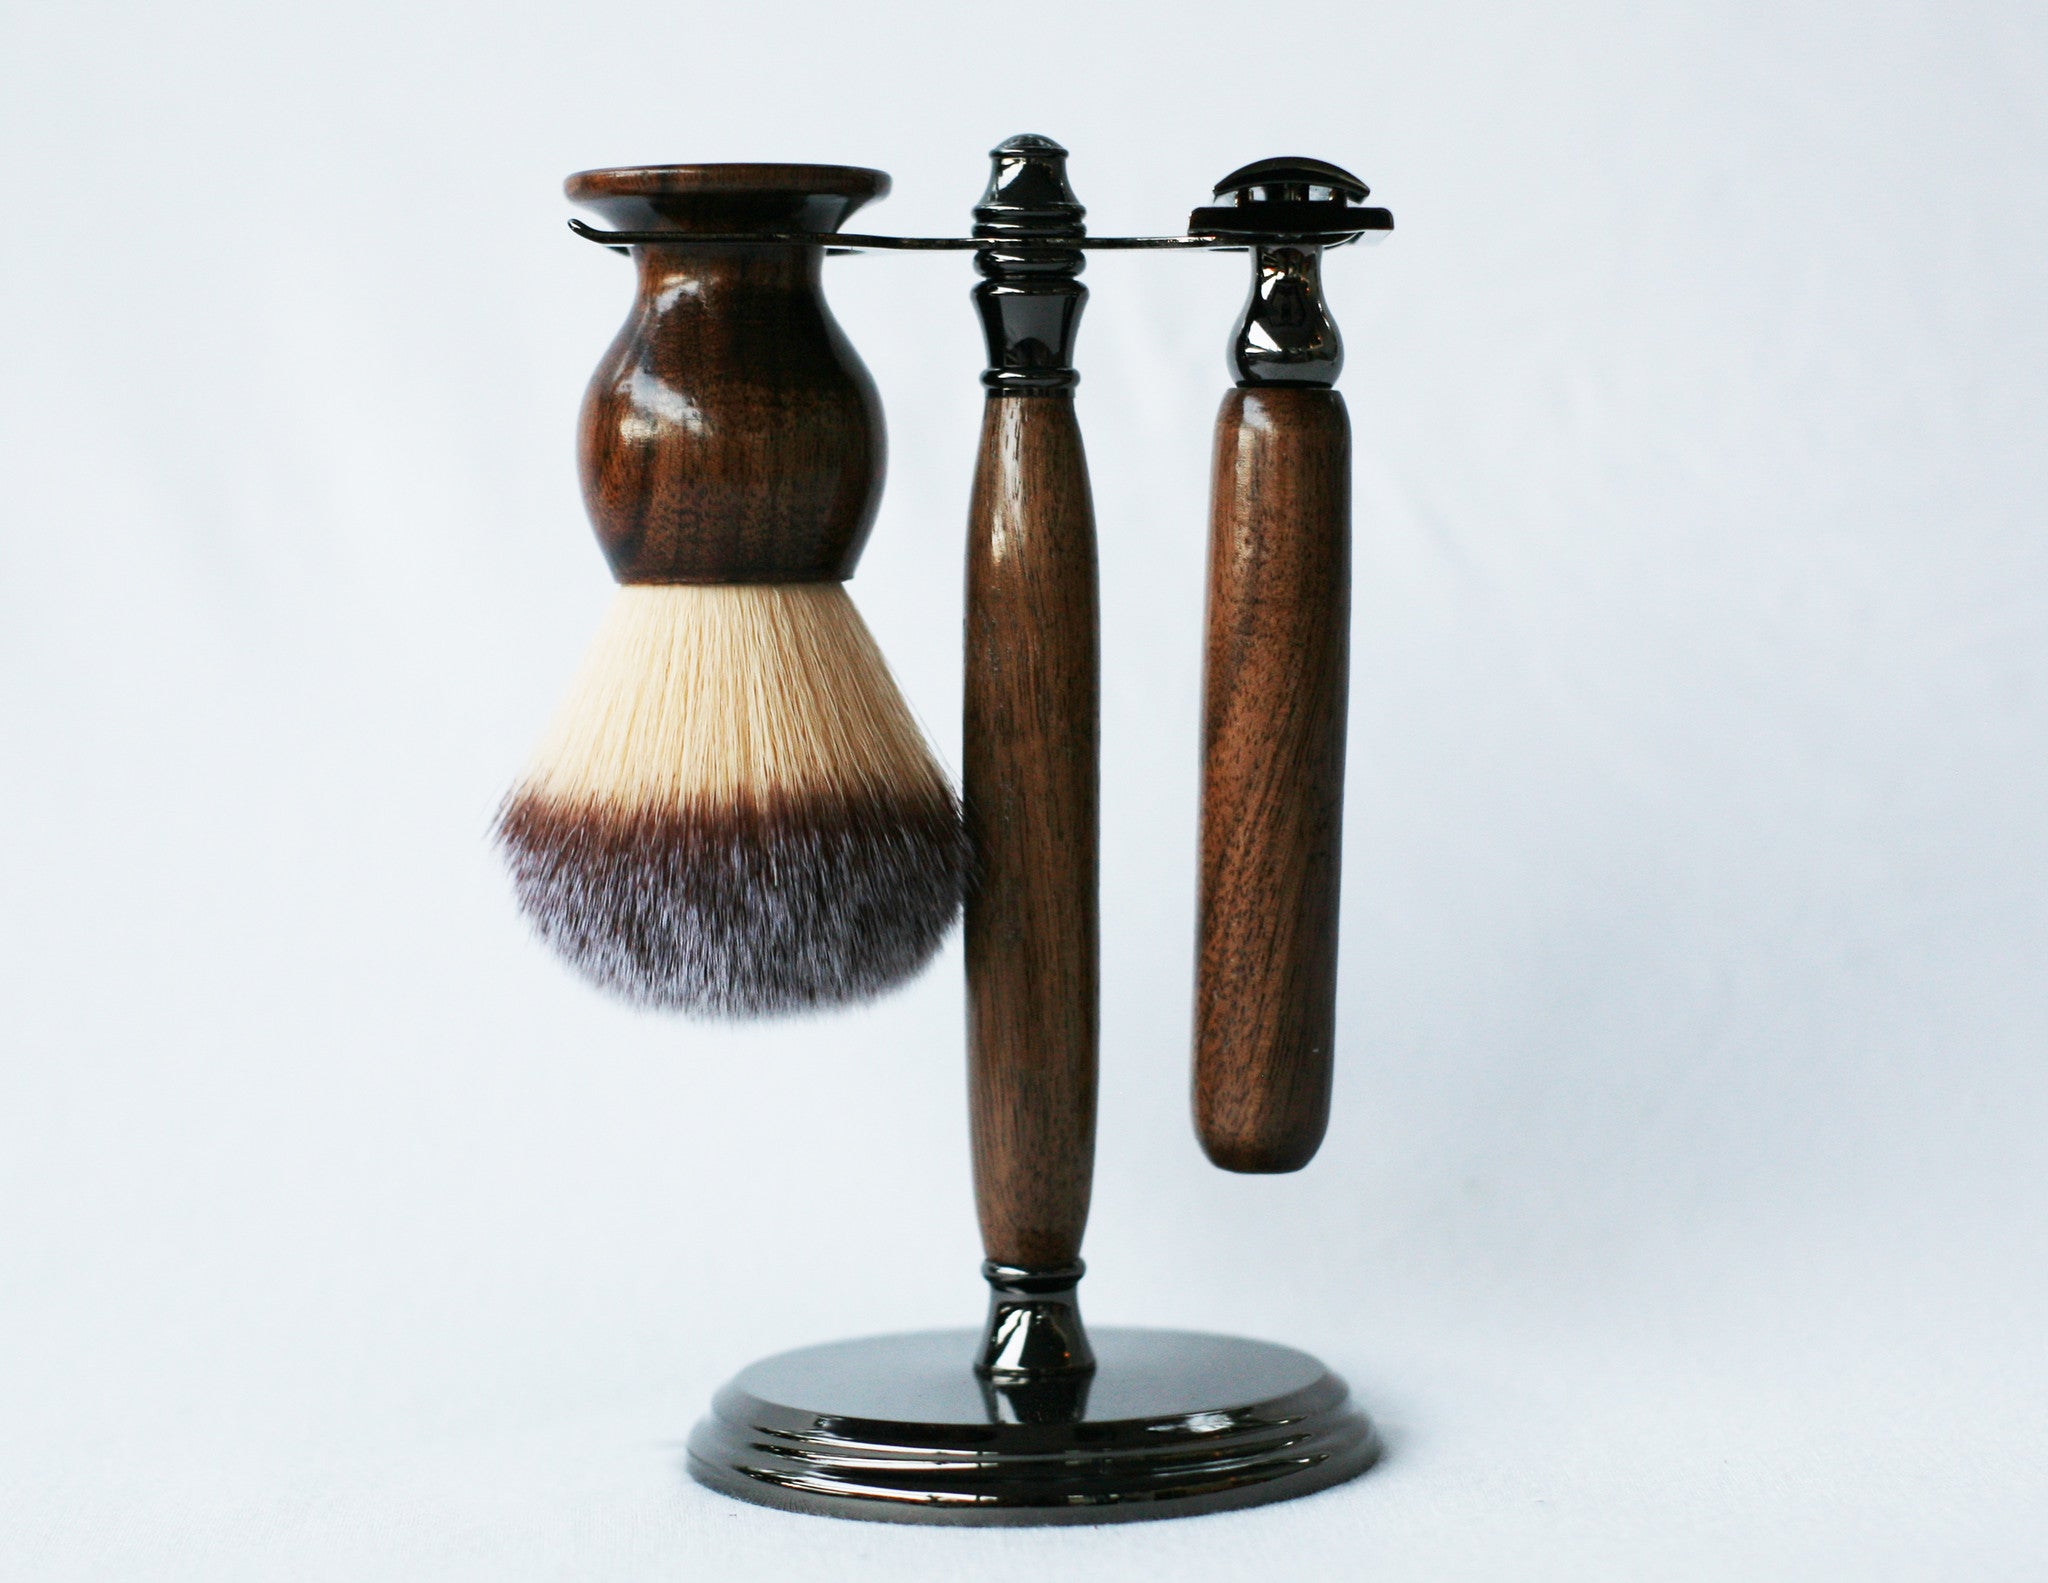 Walnut Shave Set with Gunmetal safety razor, 26mm lather brush and a matching shave stand. - CreationsByWill